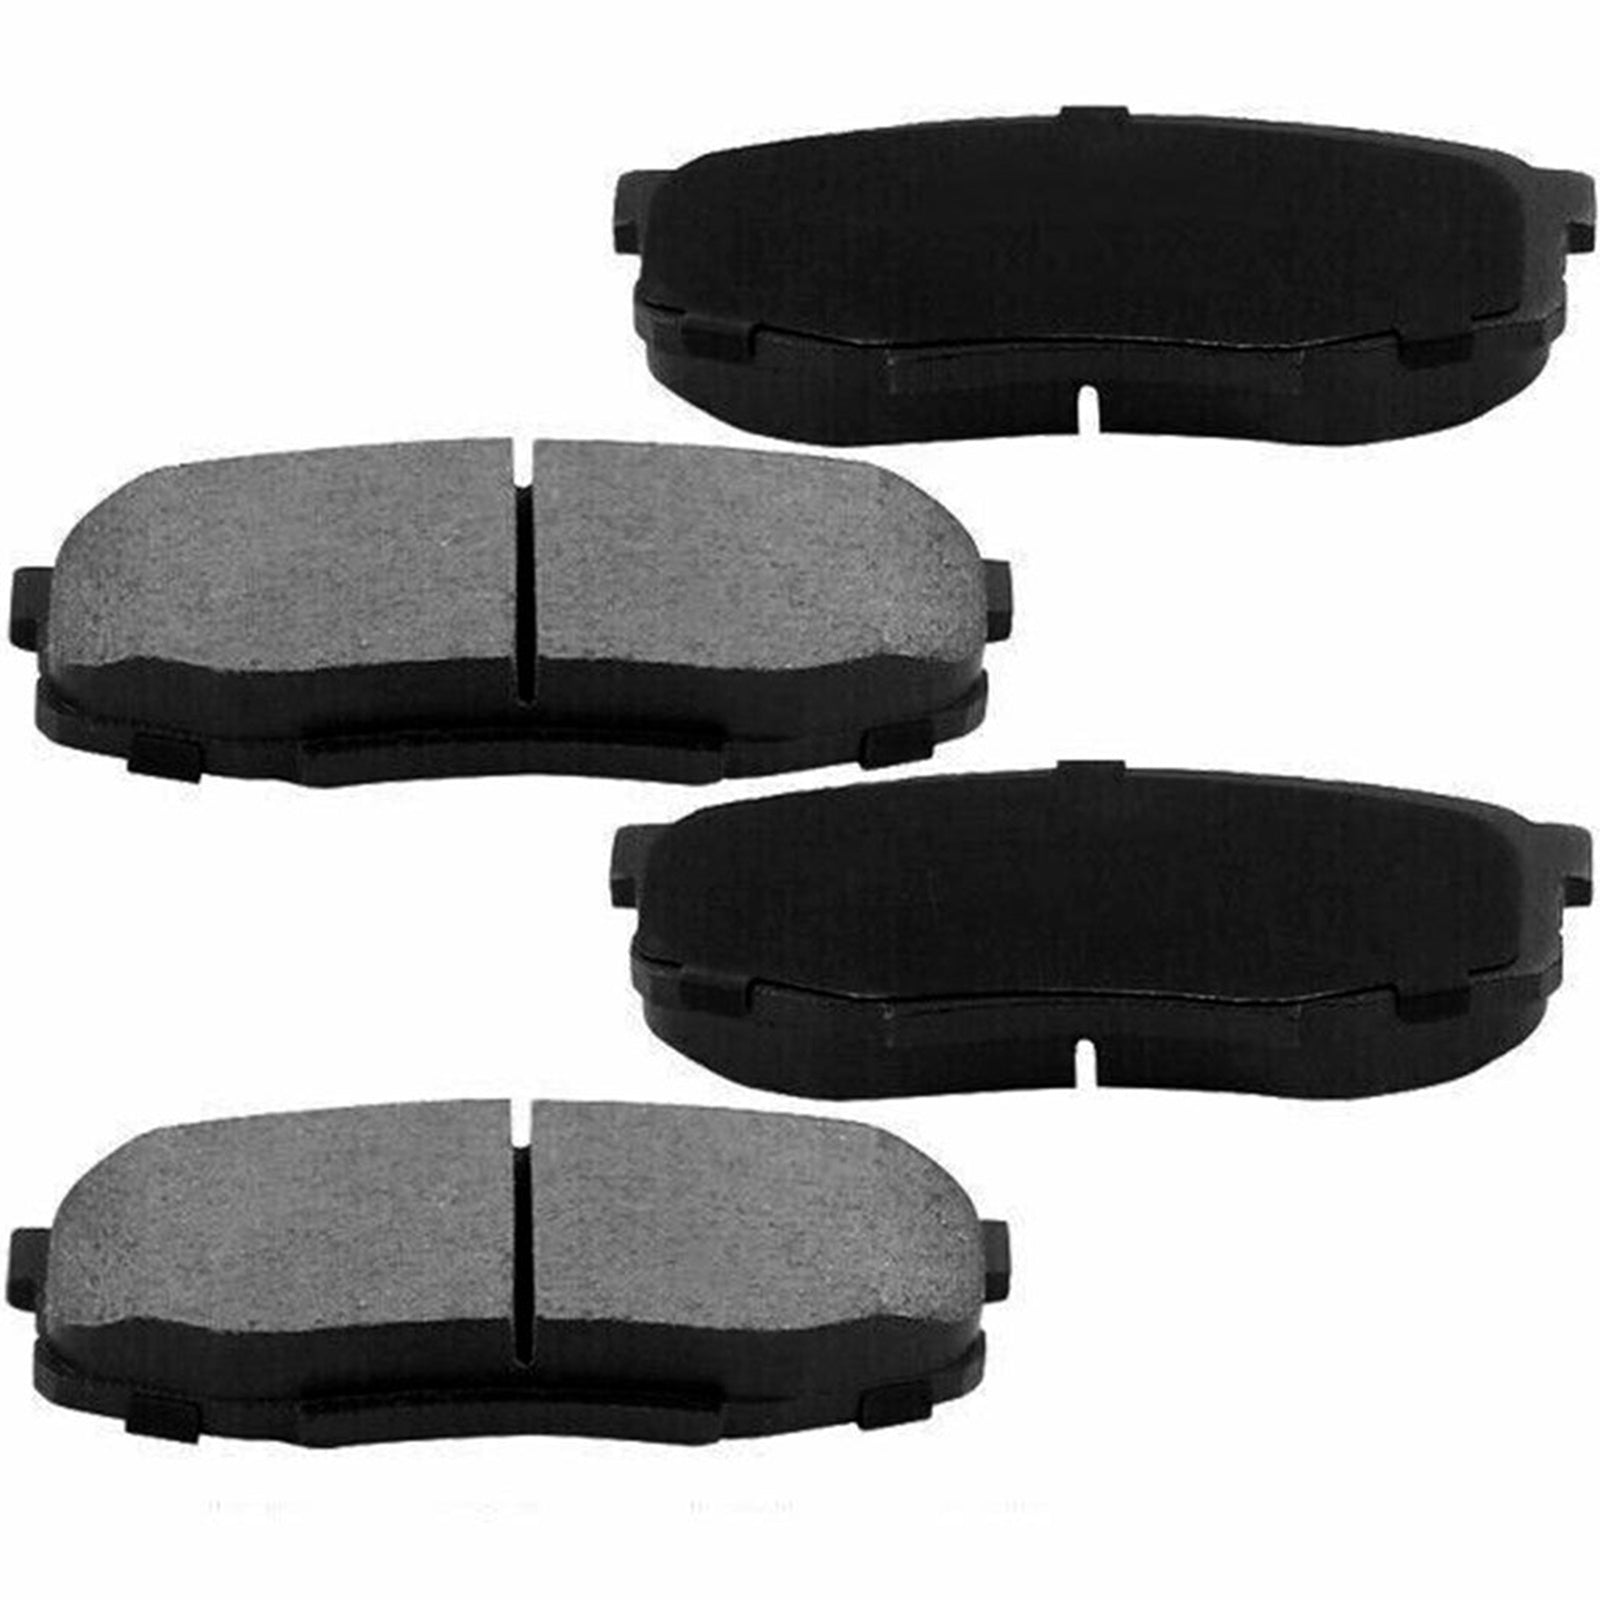 JADODE Front Ceramic Brake Pads For 2011-2015 Chevrolet Cruze/2012-2017 Chevy Sonic